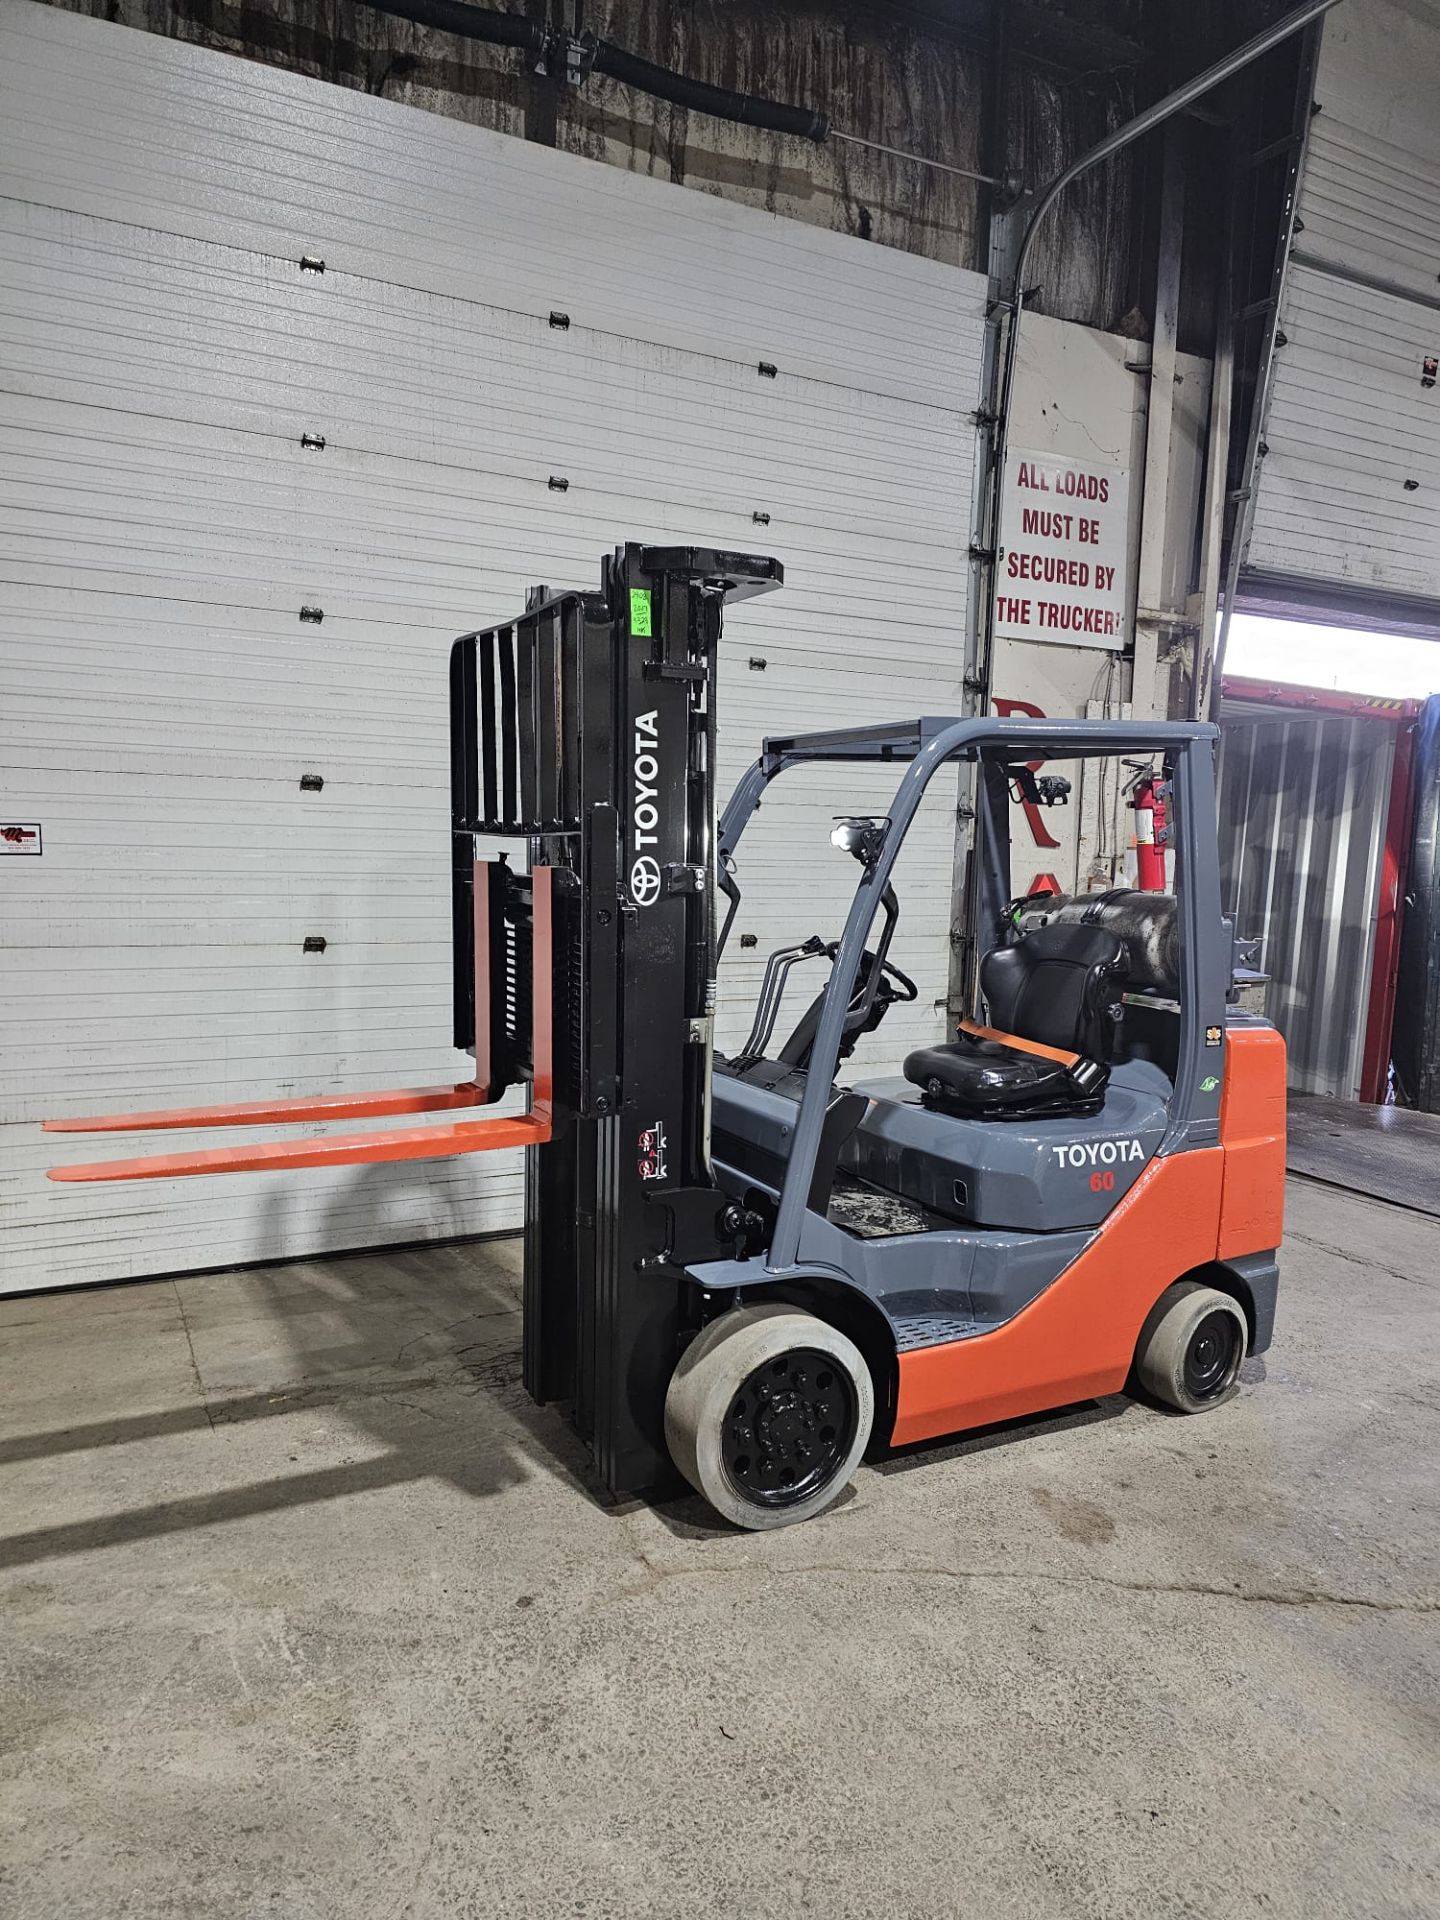 2017 TOYOTA 6,000lbs Capacity LPG (Propane) Forklift with sideshift with 3-STAGE MAST & Non - Image 3 of 8